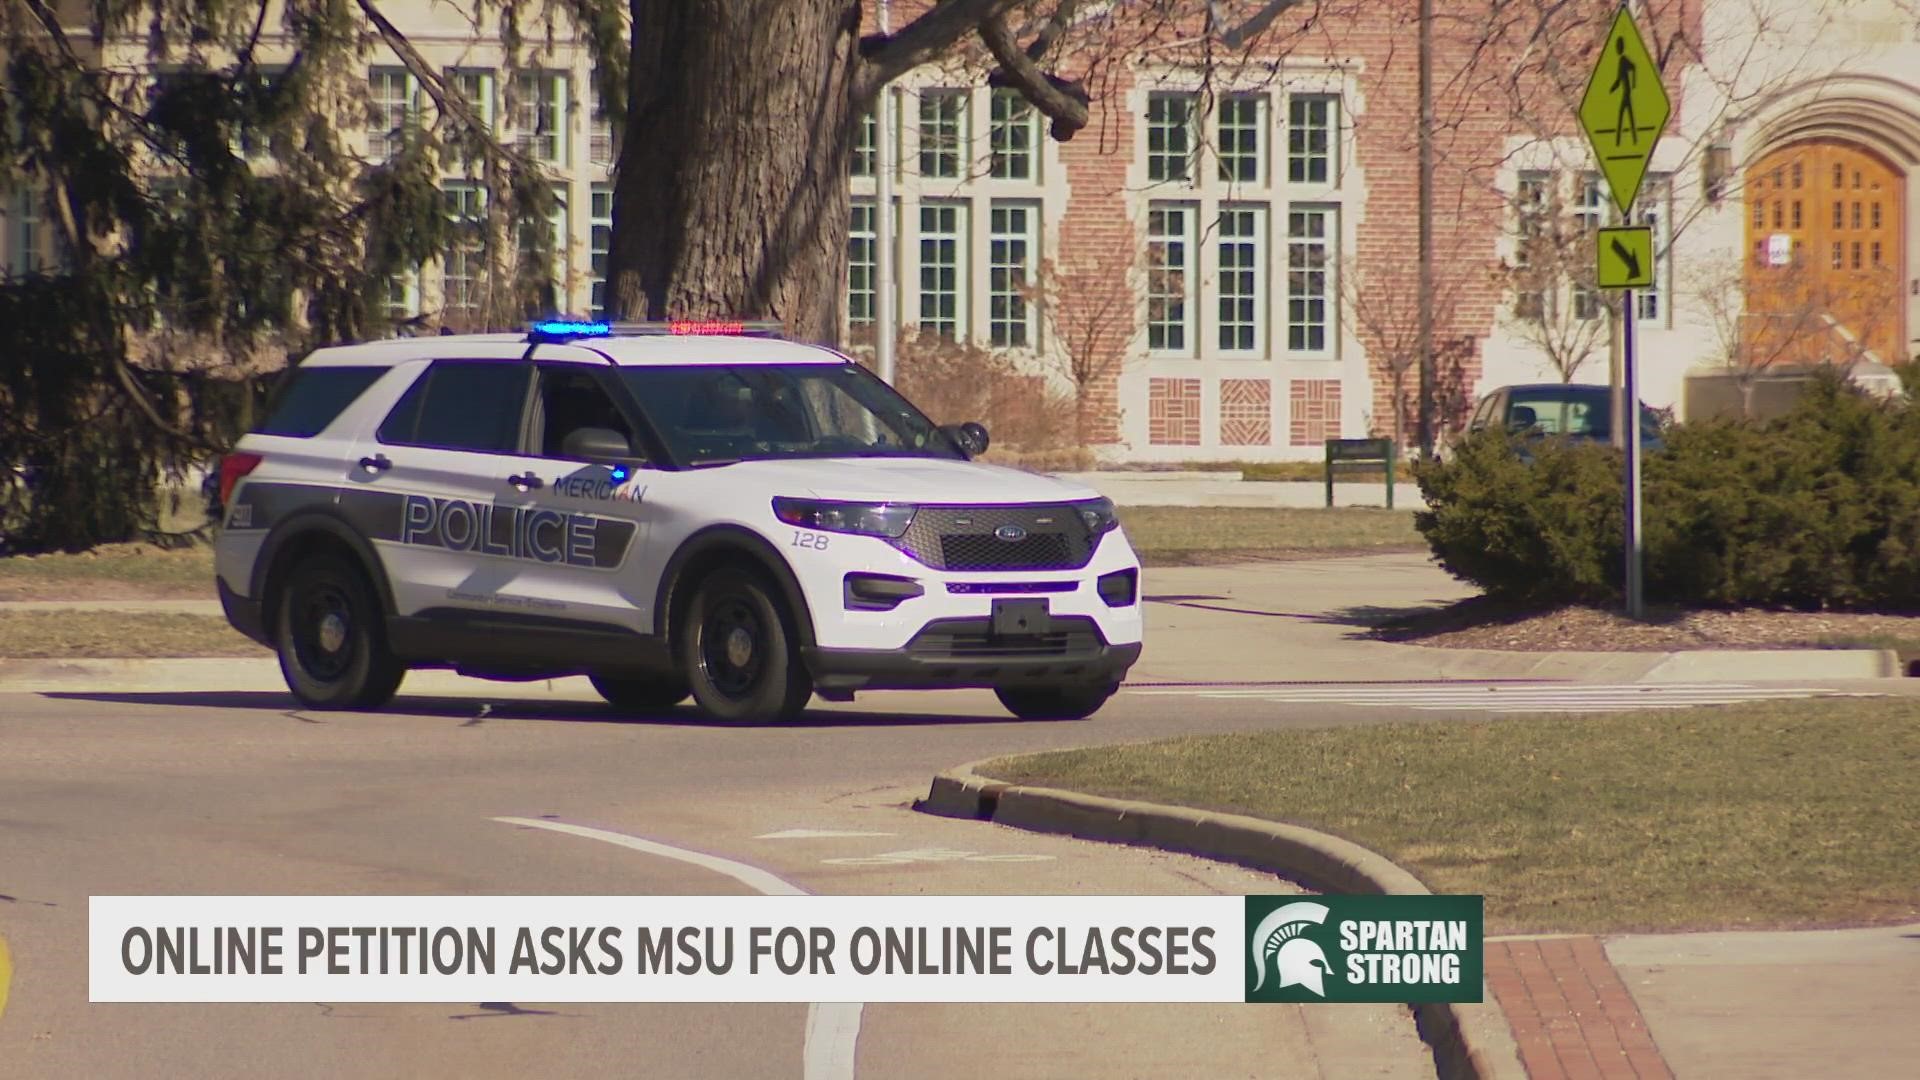 Classes are expected to resume Monday, Feb. 20, one week after the deadly shooting.